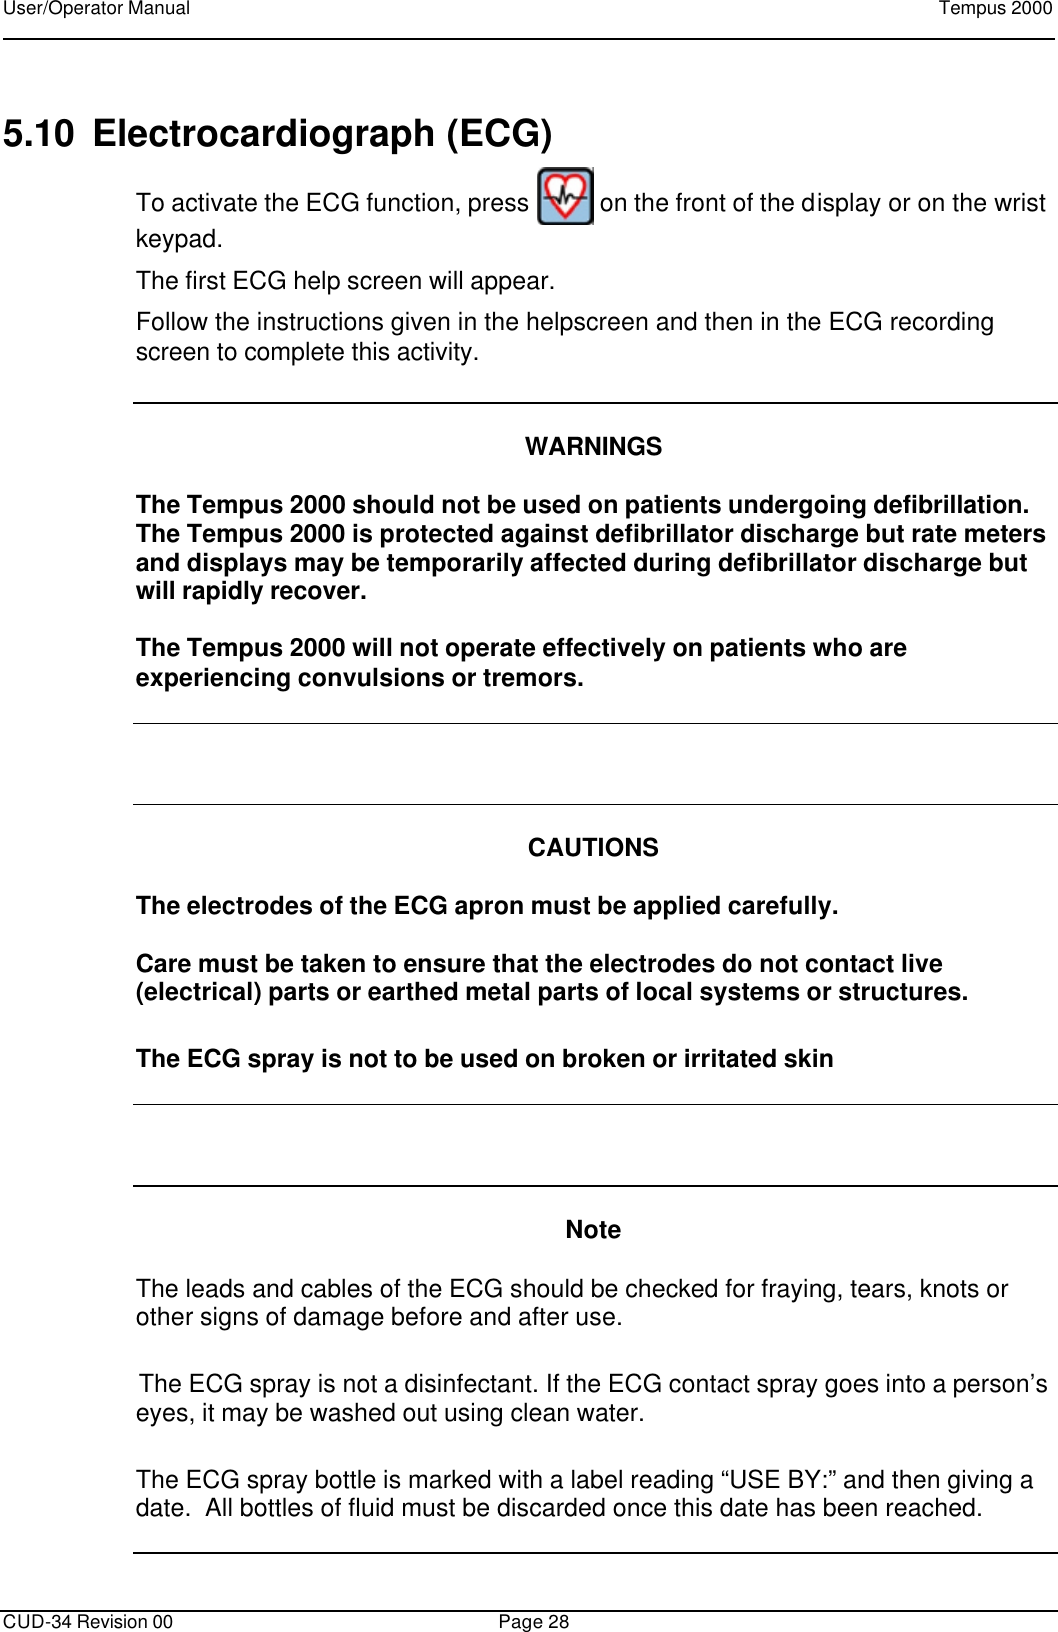 User/Operator Manual    Tempus 2000      CUD-34 Revision 00 Page 28  5.10 Electrocardiograph (ECG) To activate the ECG function, press   on the front of the display or on the wrist keypad. The first ECG help screen will appear.   Follow the instructions given in the helpscreen and then in the ECG recording screen to complete this activity.   WARNINGS  The Tempus 2000 should not be used on patients undergoing defibrillation.  The Tempus 2000 is protected against defibrillator discharge but rate meters and displays may be temporarily affected during defibrillator discharge but will rapidly recover.  The Tempus 2000 will not operate effectively on patients who are experiencing convulsions or tremors.     CAUTIONS  The electrodes of the ECG apron must be applied carefully.    Care must be taken to ensure that the electrodes do not contact live (electrical) parts or earthed metal parts of local systems or structures. The ECG spray is not to be used on broken or irritated skin     Note  The leads and cables of the ECG should be checked for fraying, tears, knots or other signs of damage before and after use.  The ECG spray is not a disinfectant. If the ECG contact spray goes into a person’s eyes, it may be washed out using clean water. The ECG spray bottle is marked with a label reading “USE BY:” and then giving a date.  All bottles of fluid must be discarded once this date has been reached.     